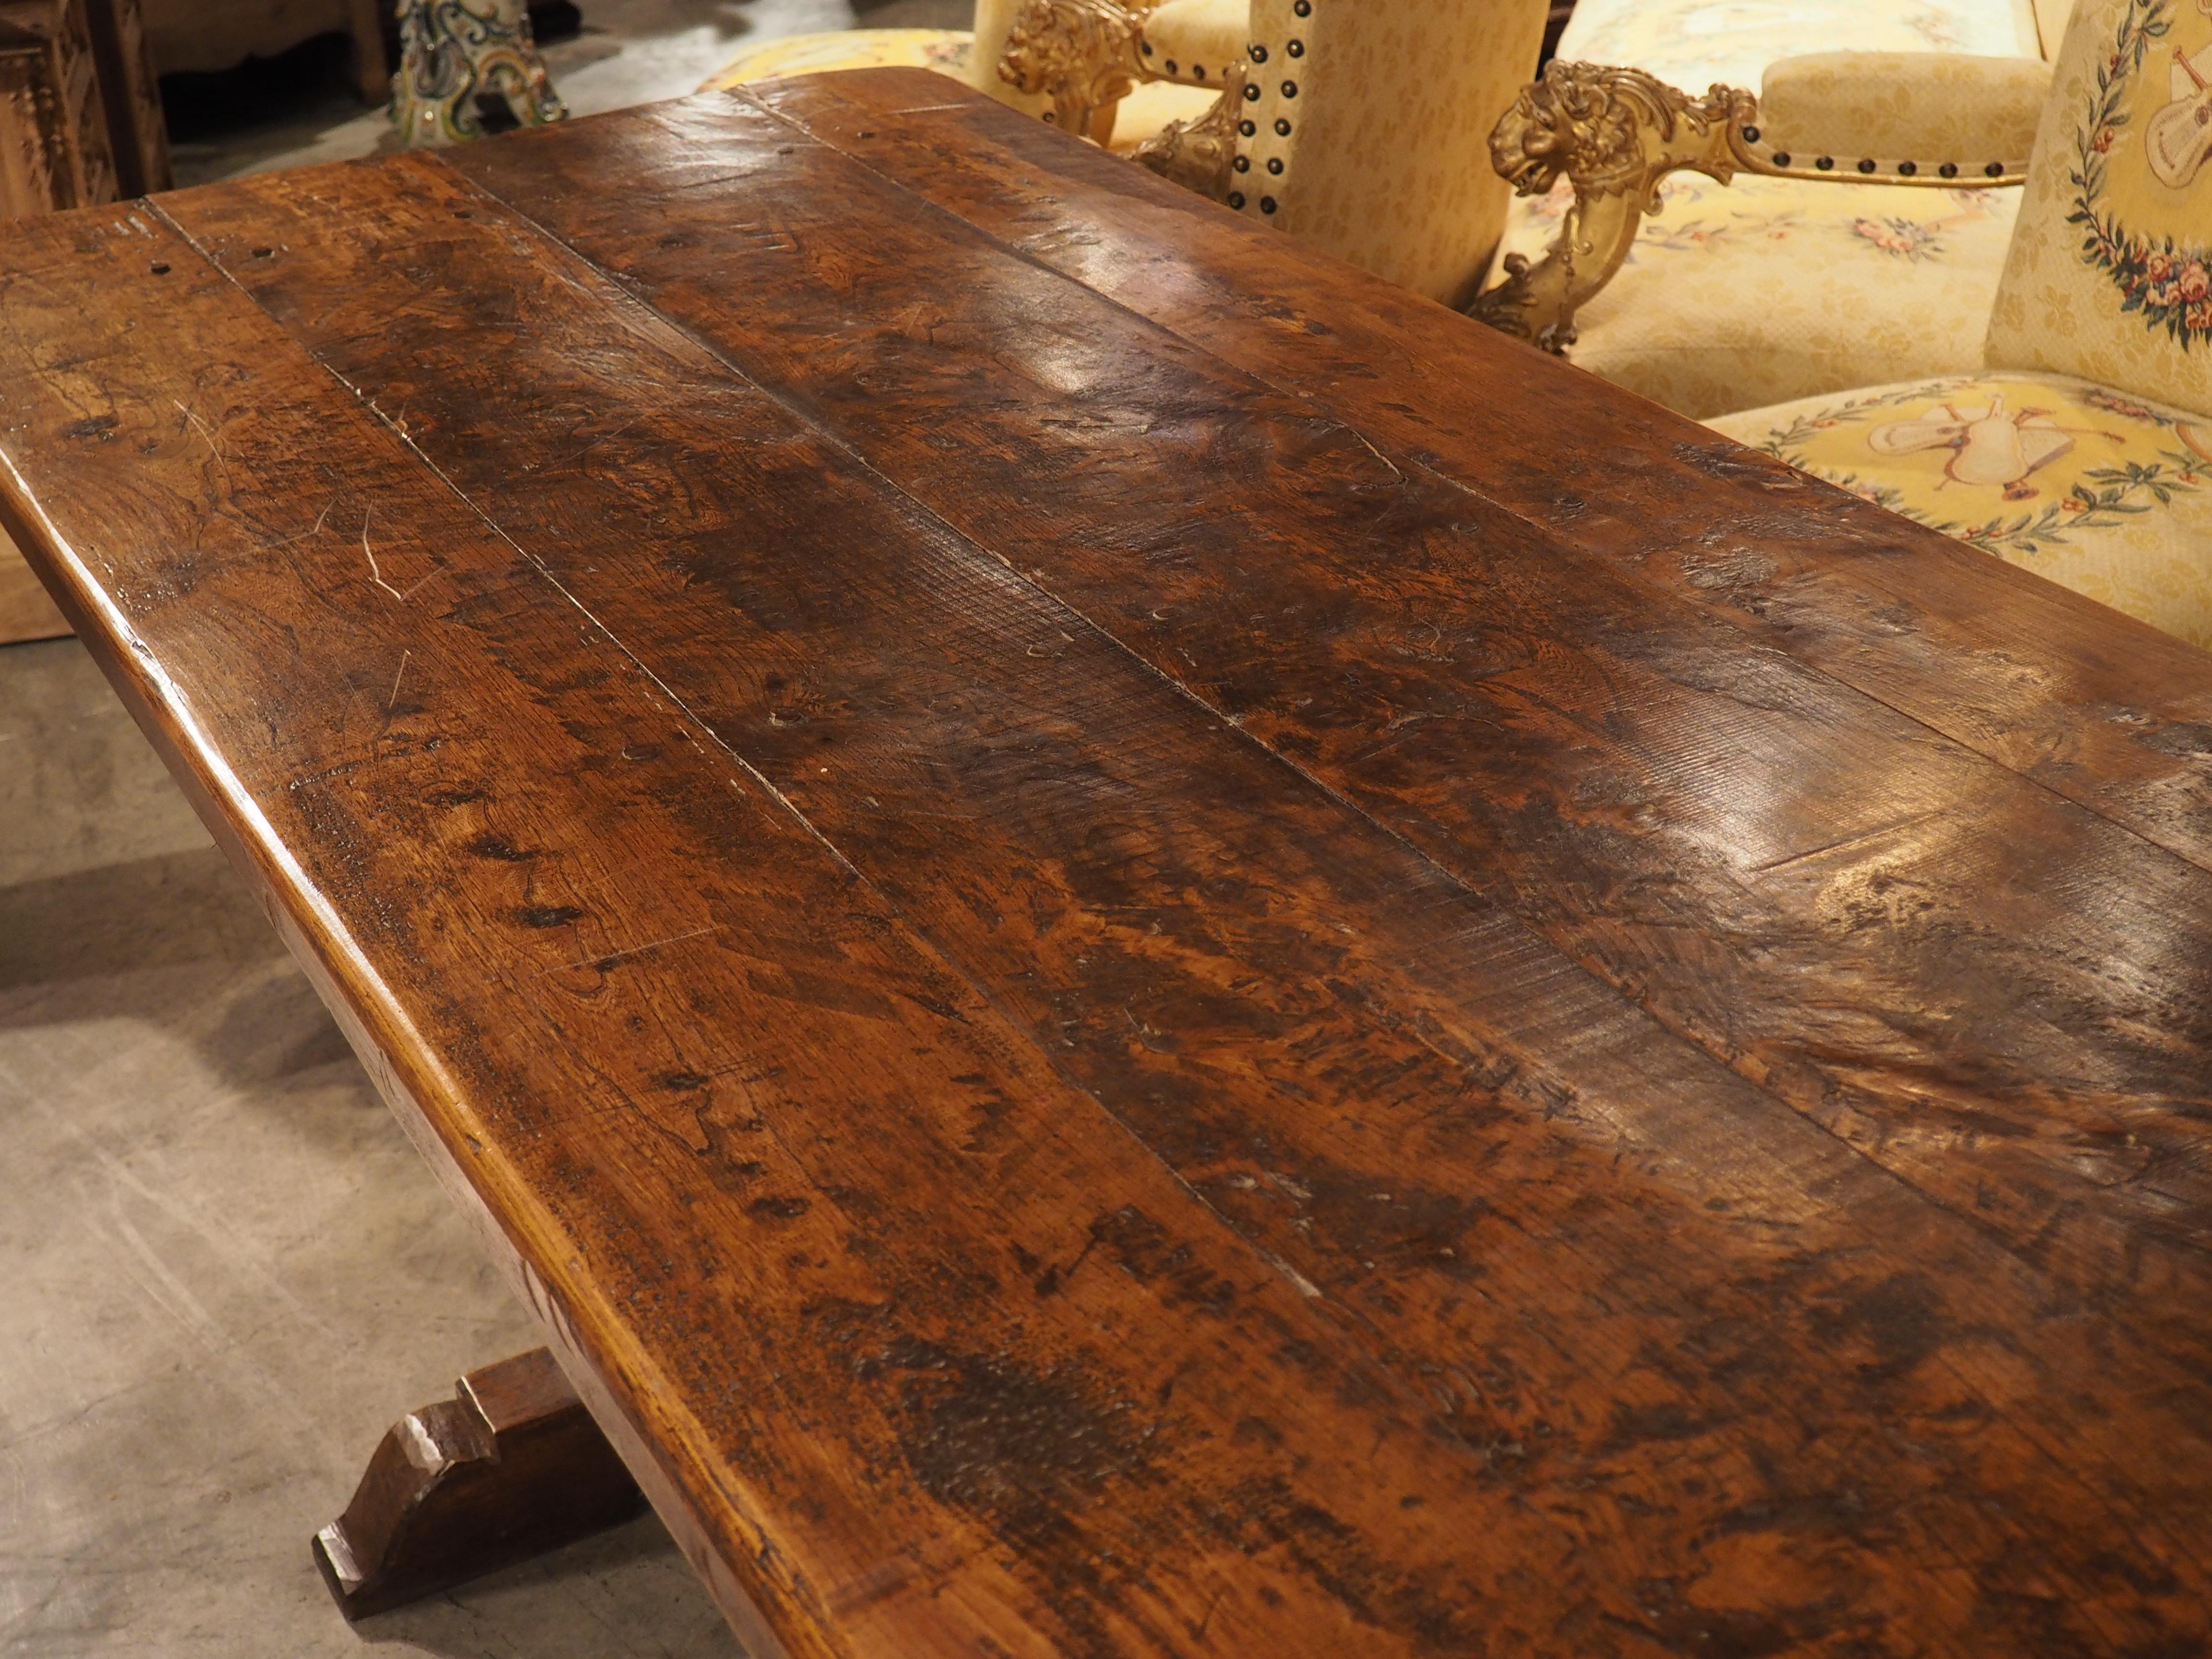 Hand-Carved Antique Chestnut Dining Table from a Chateau, Coat Nizan, Brittany